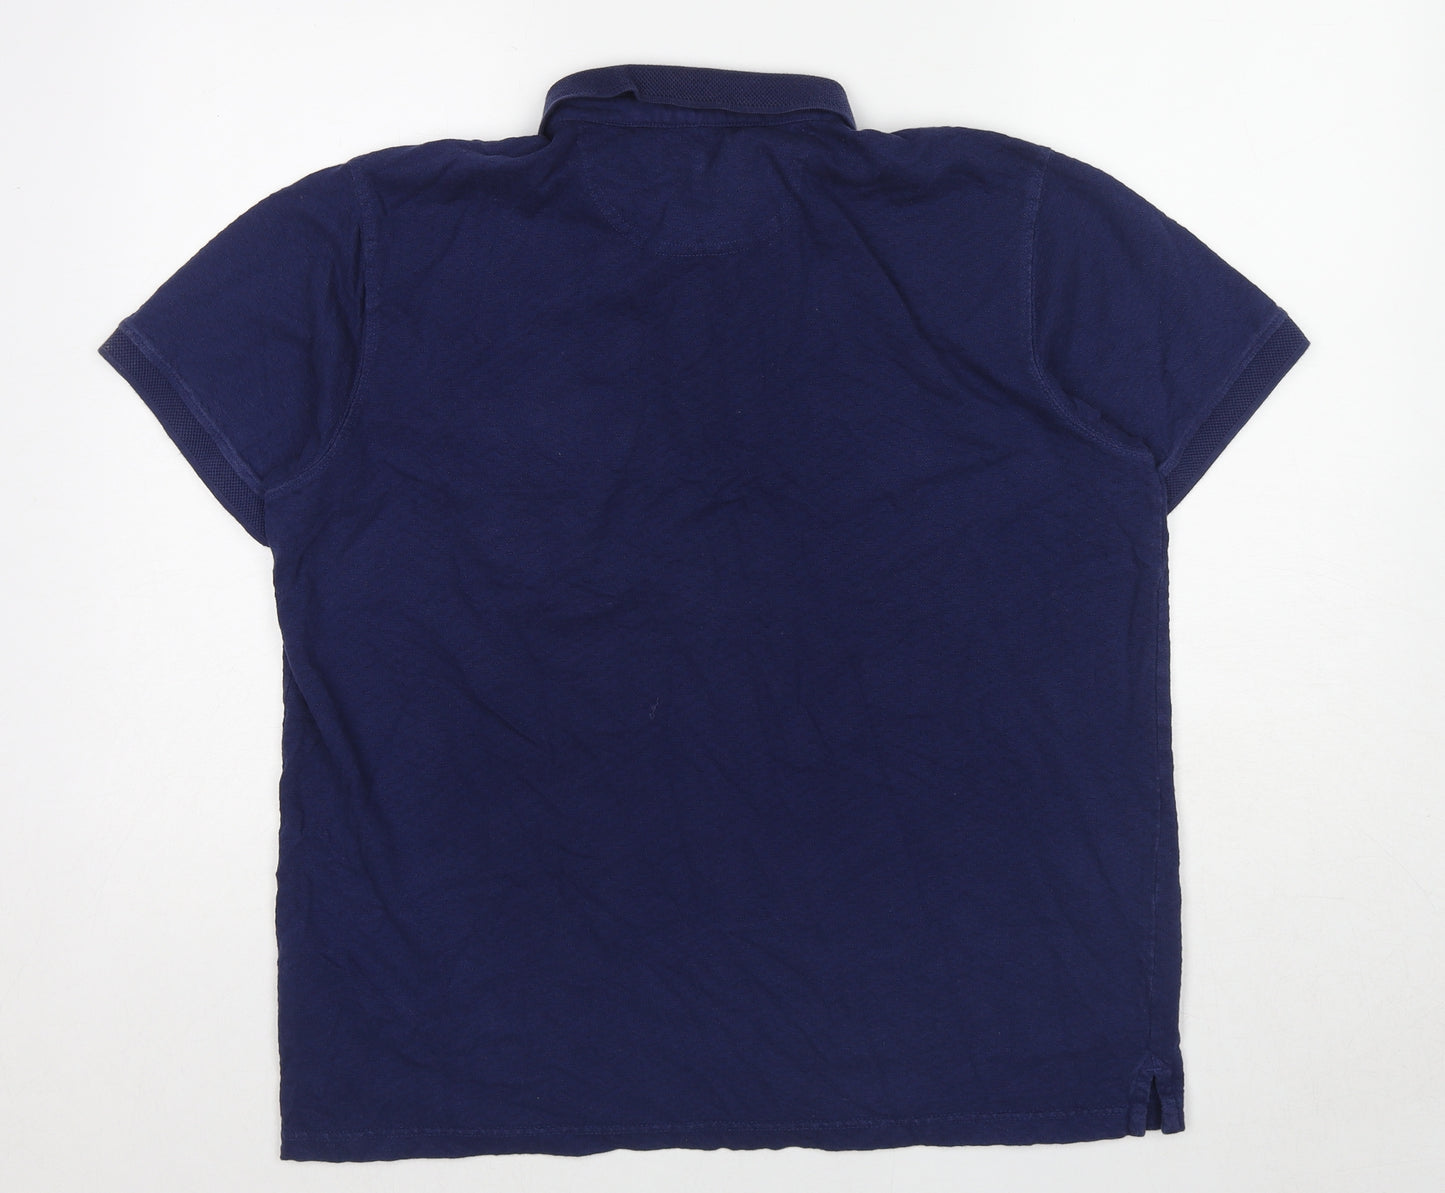 Cotton Traders Womens Blue Cotton Basic Polo Size L Collared